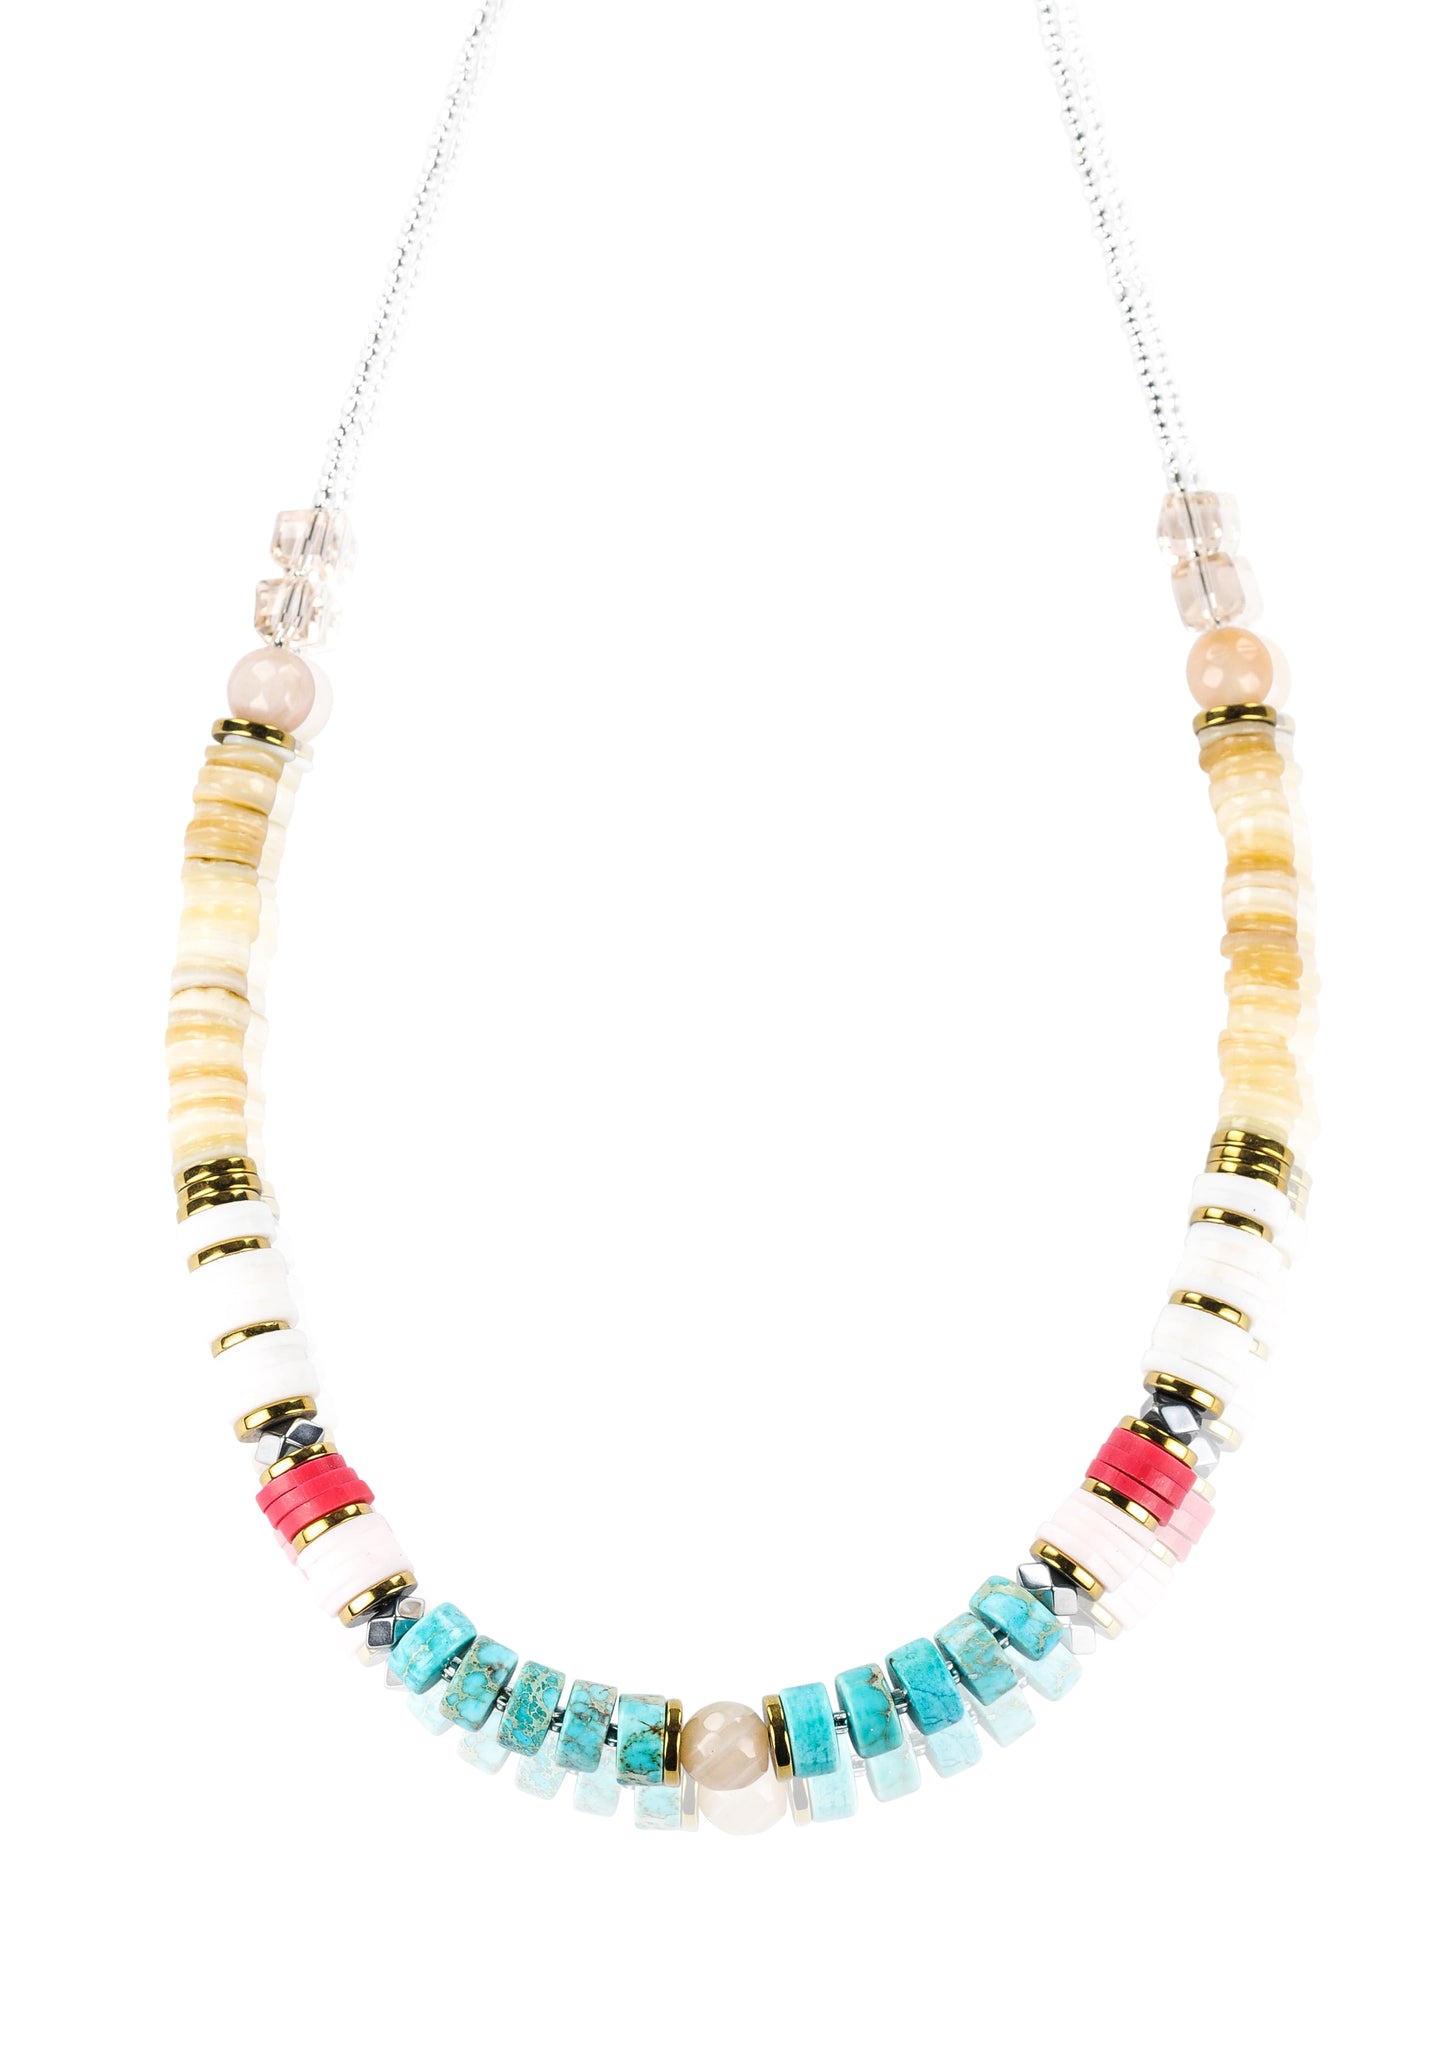 Turquoise jasper stone and agate necklace